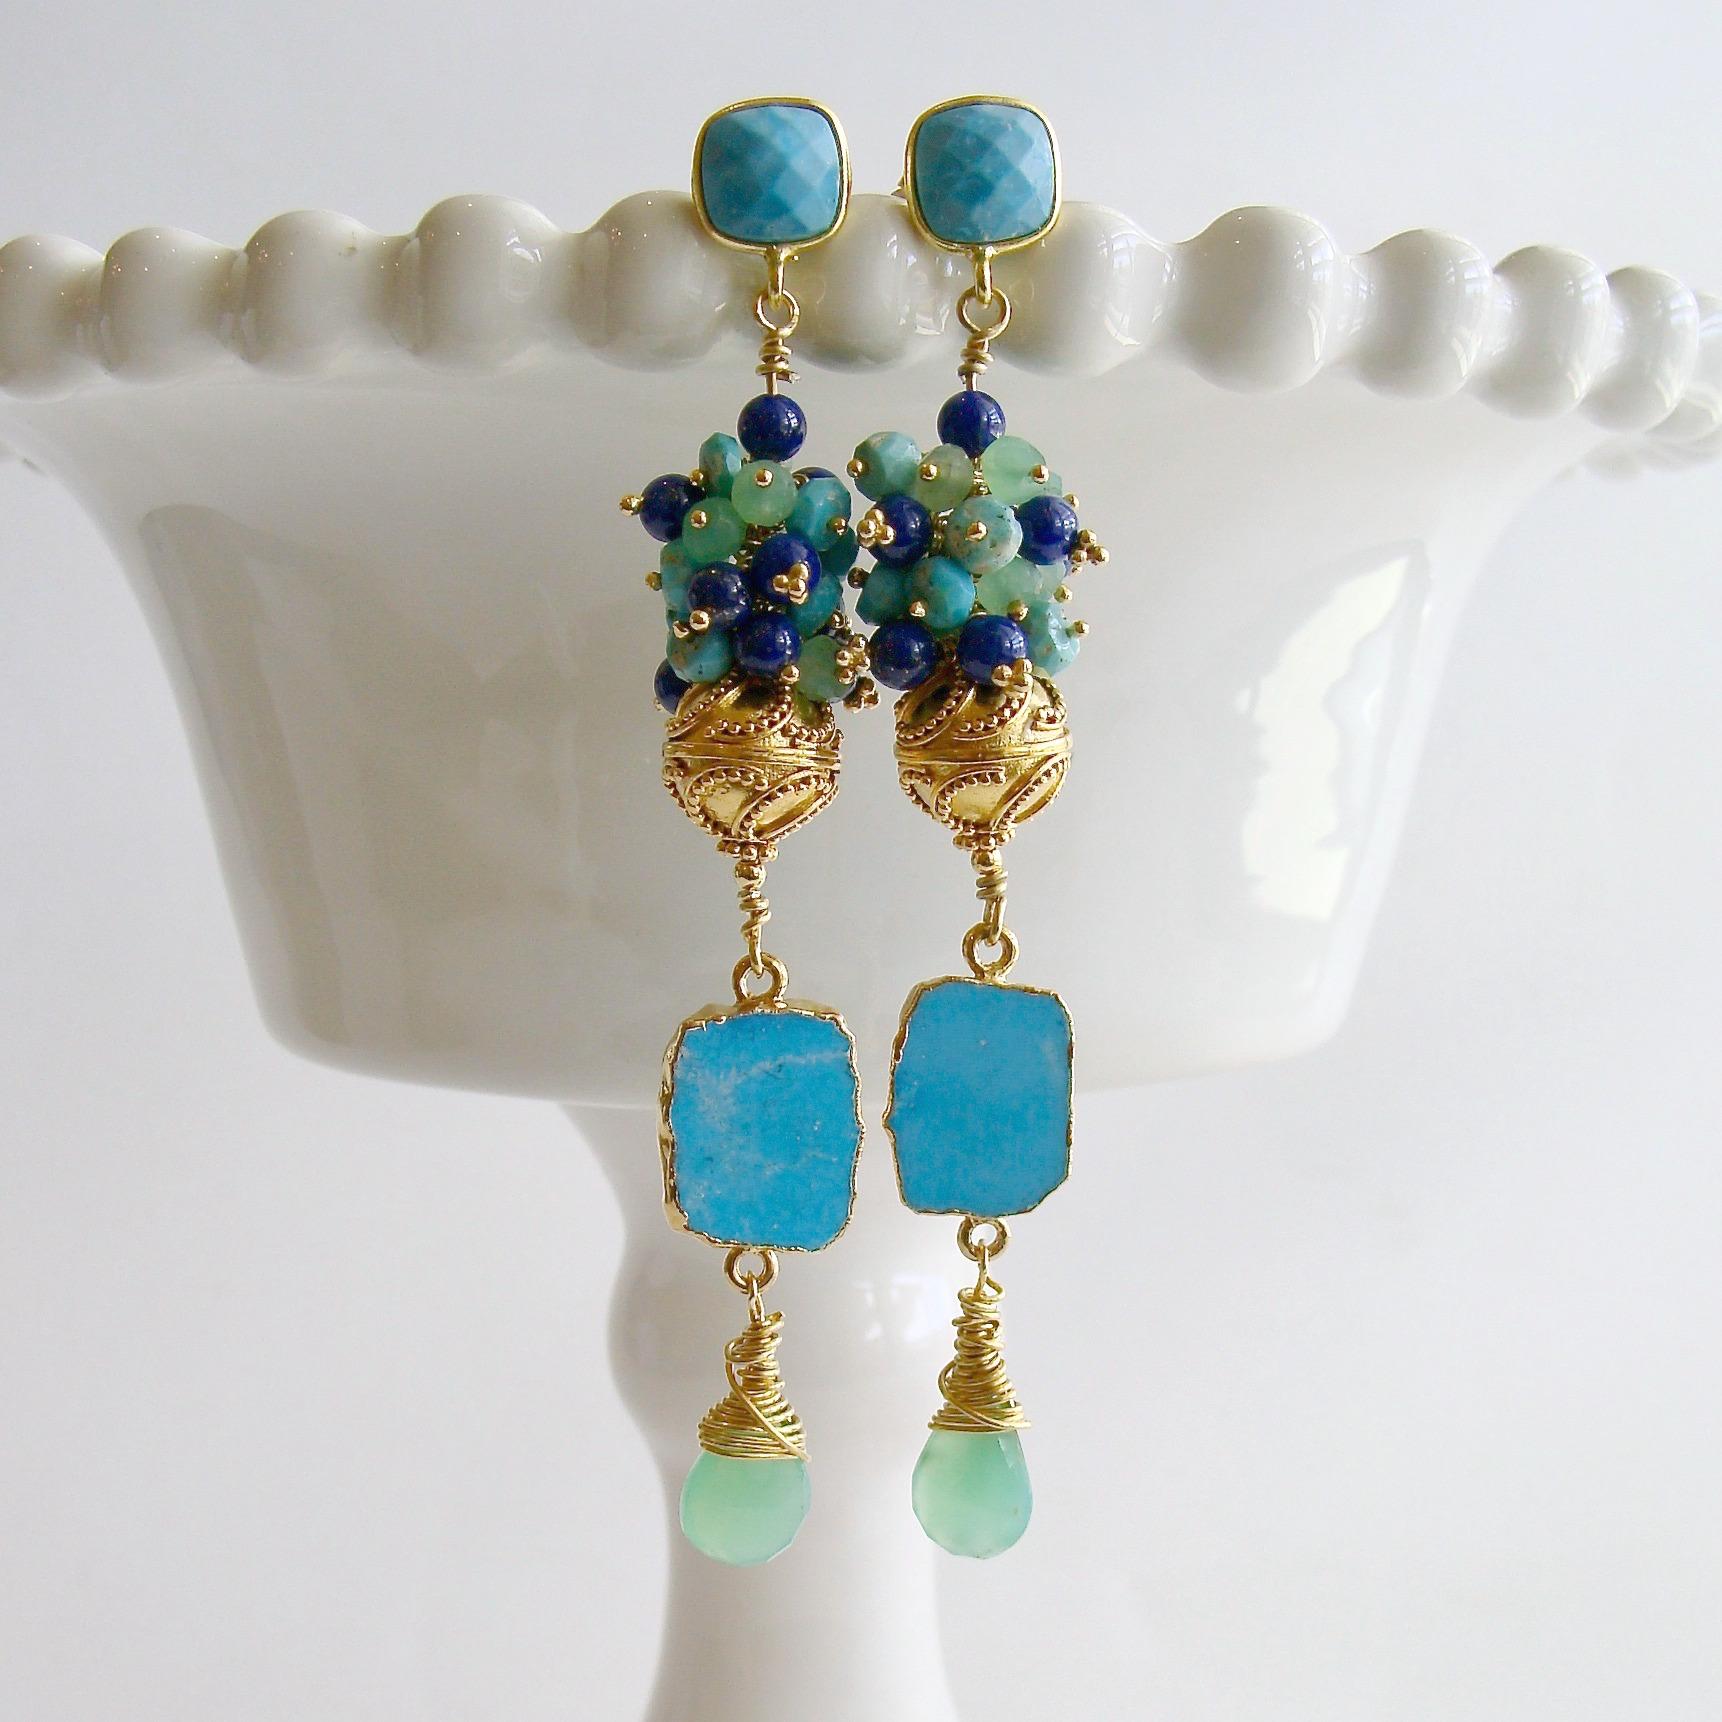 Morgaine Duster Earrings.

A generous cluster of turquoise, spring green and royal blue rondelles consisting of Sleeping Beauty Turquoise, chrysoprase and lapis lazuli - crowns a swirled gold vermeil bead, while coveted Sleeping Beauty Turquoise